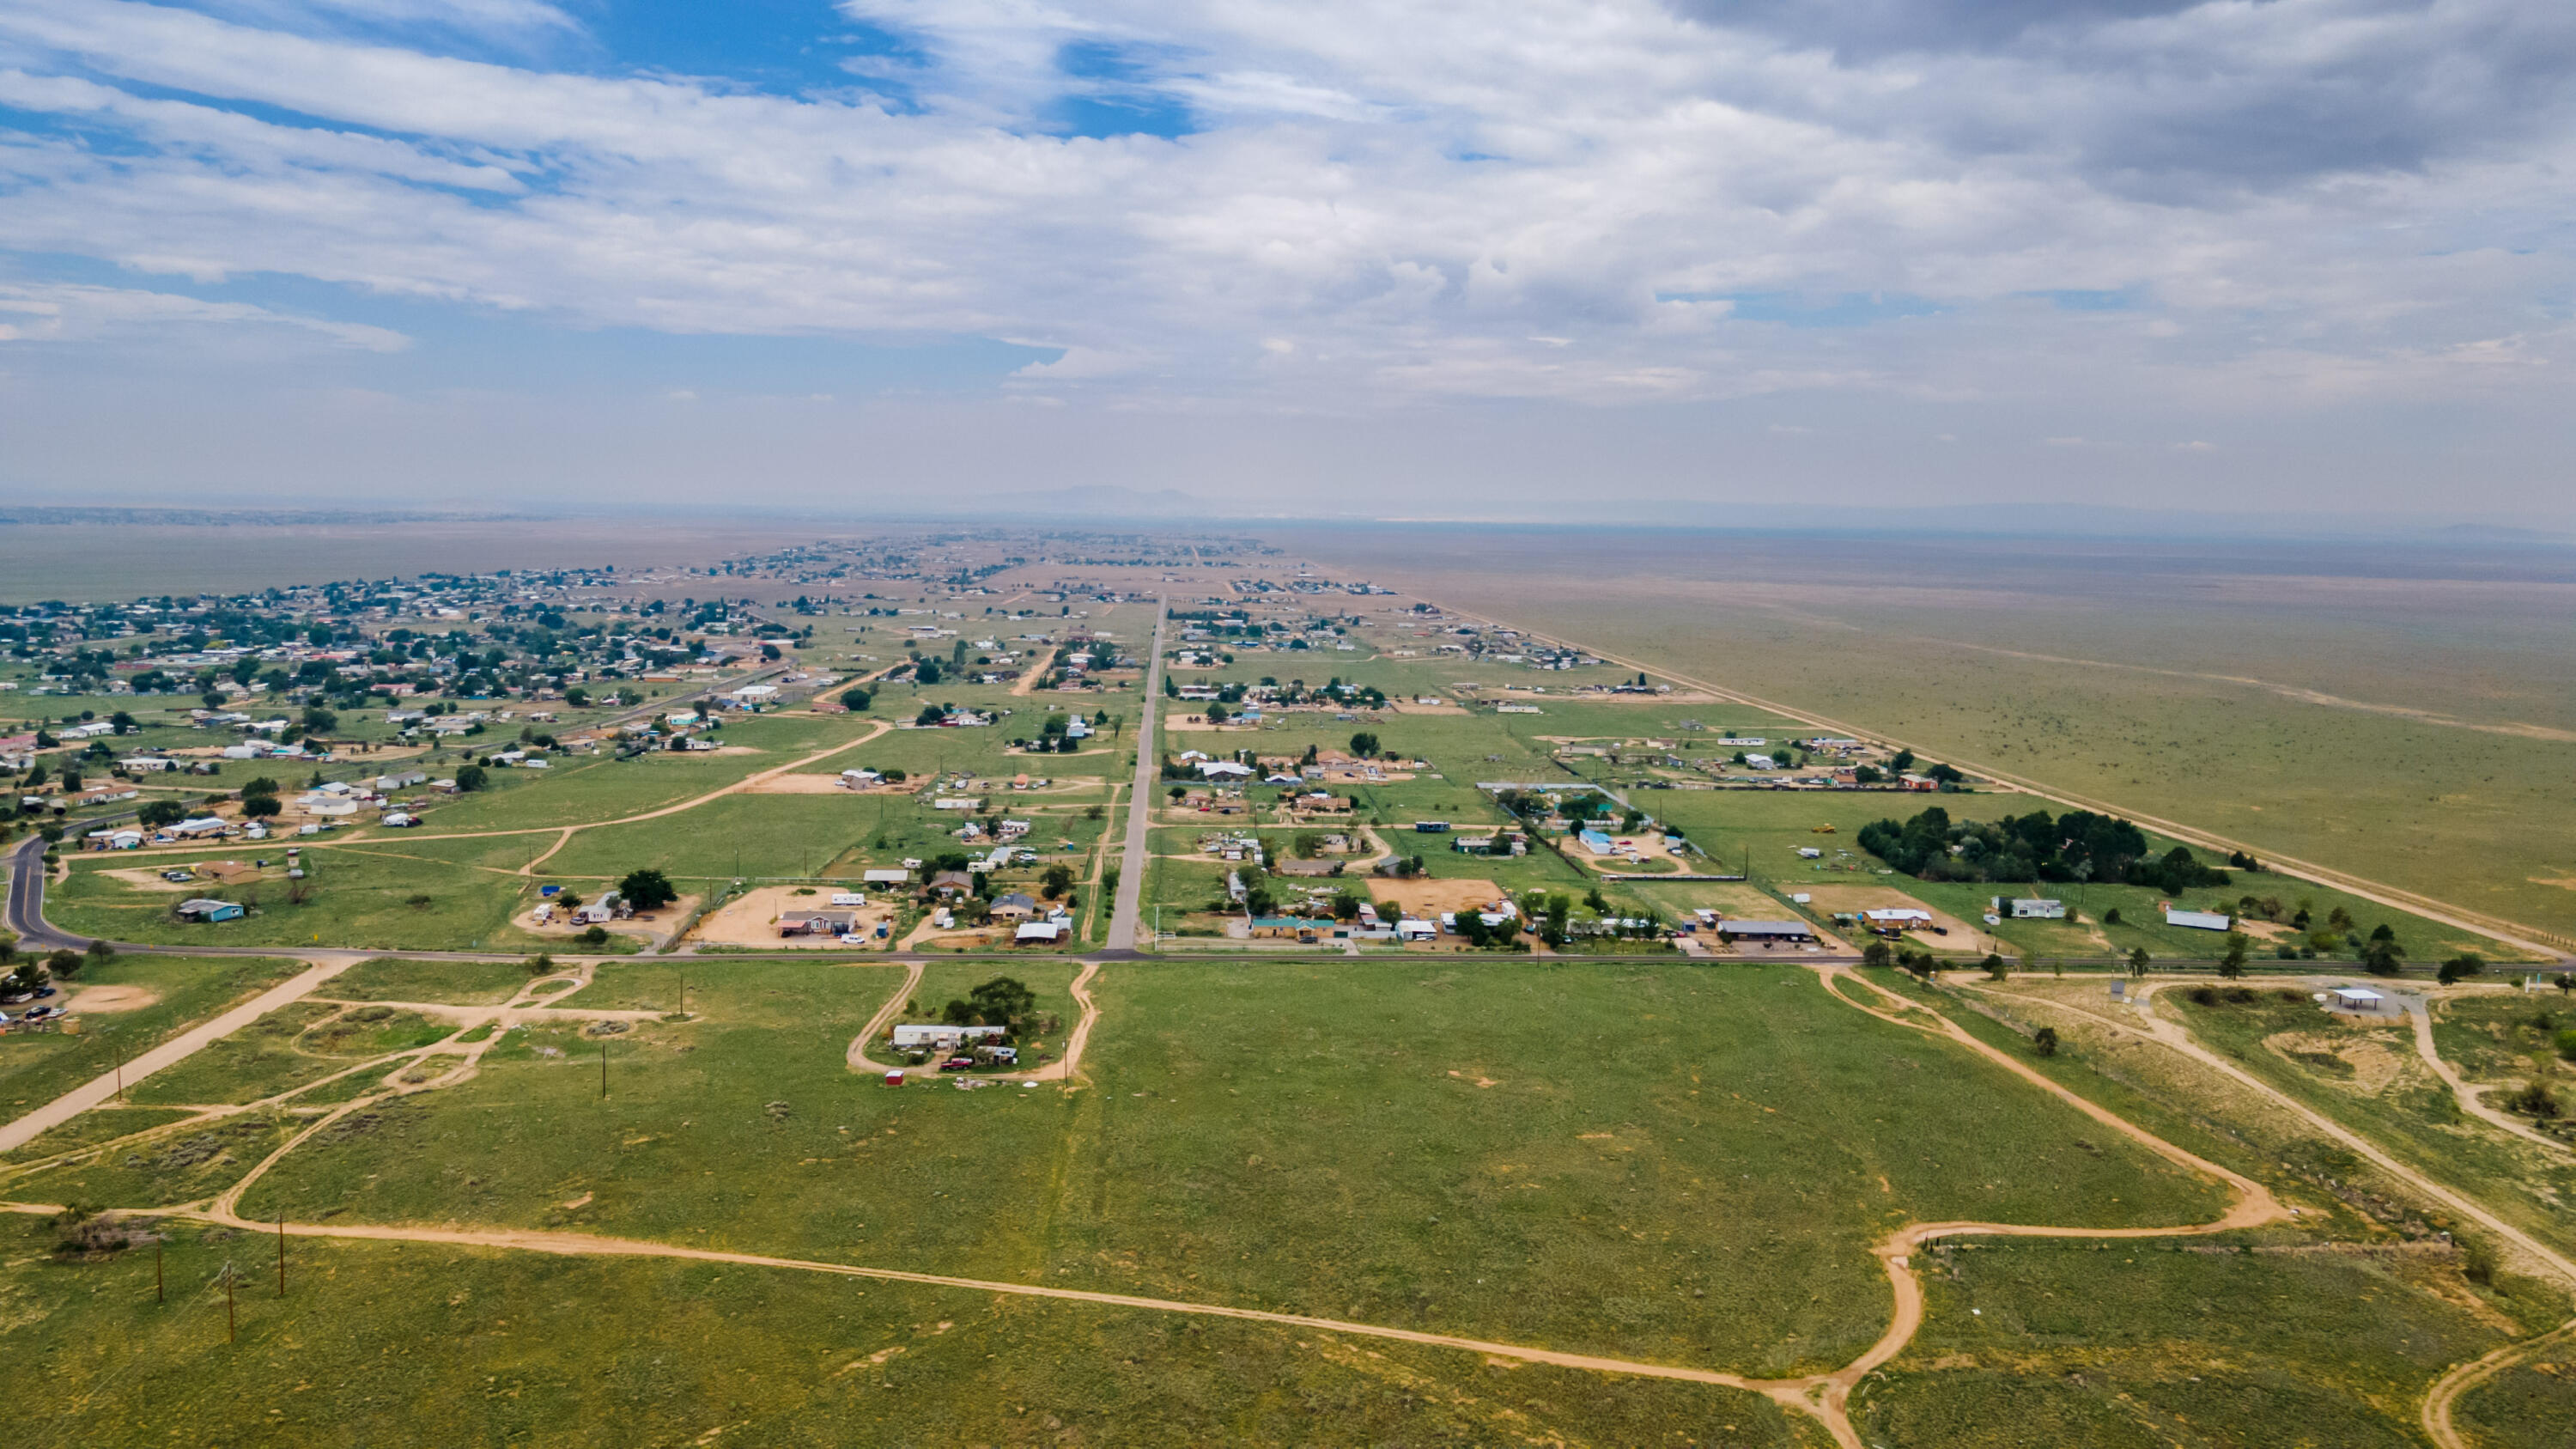 850 Meadow Lake Road, Meadow Lake, New Mexico 87031, ,Land,For Sale,850 Meadow Lake Road,1045129